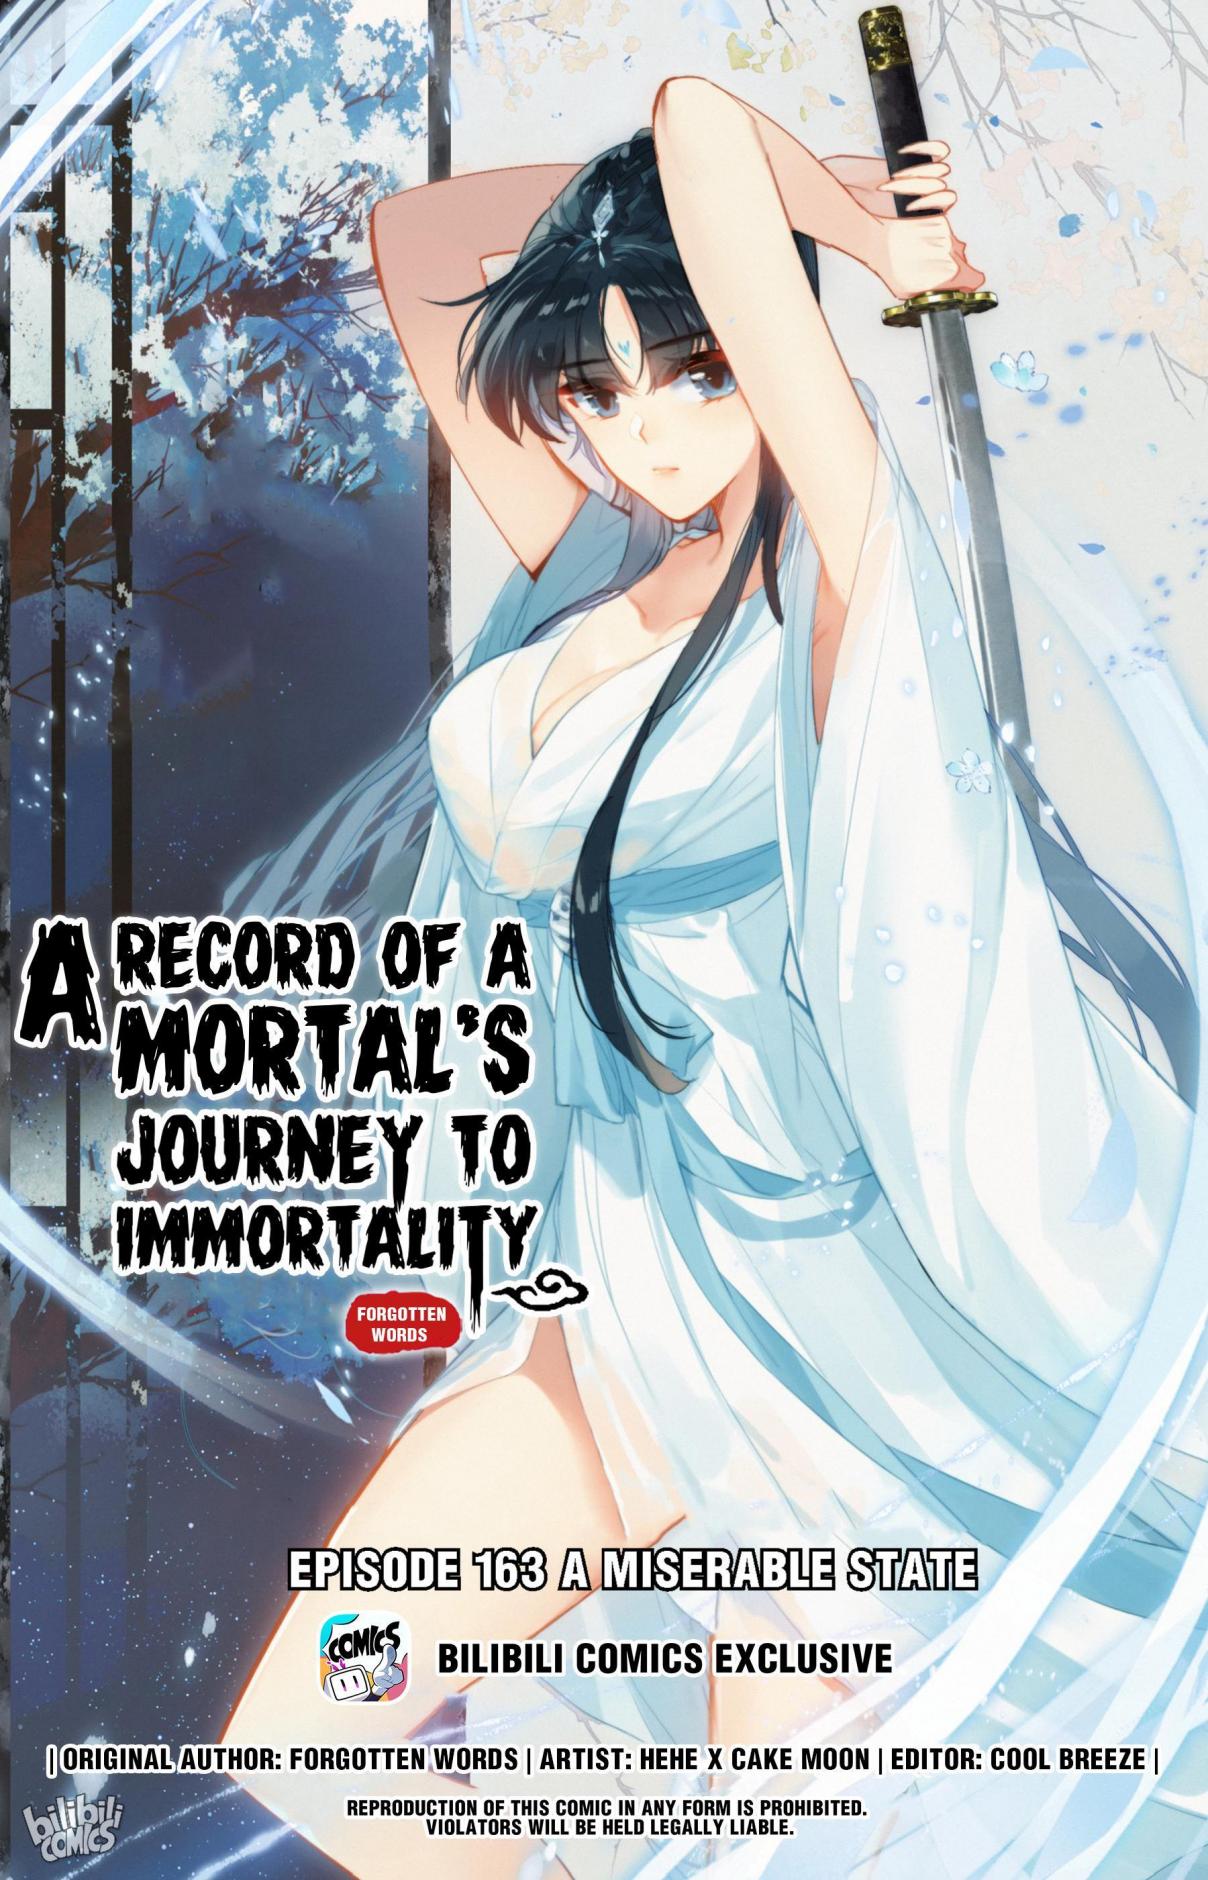 A Record of a Mortal's Journey to Immortality 163